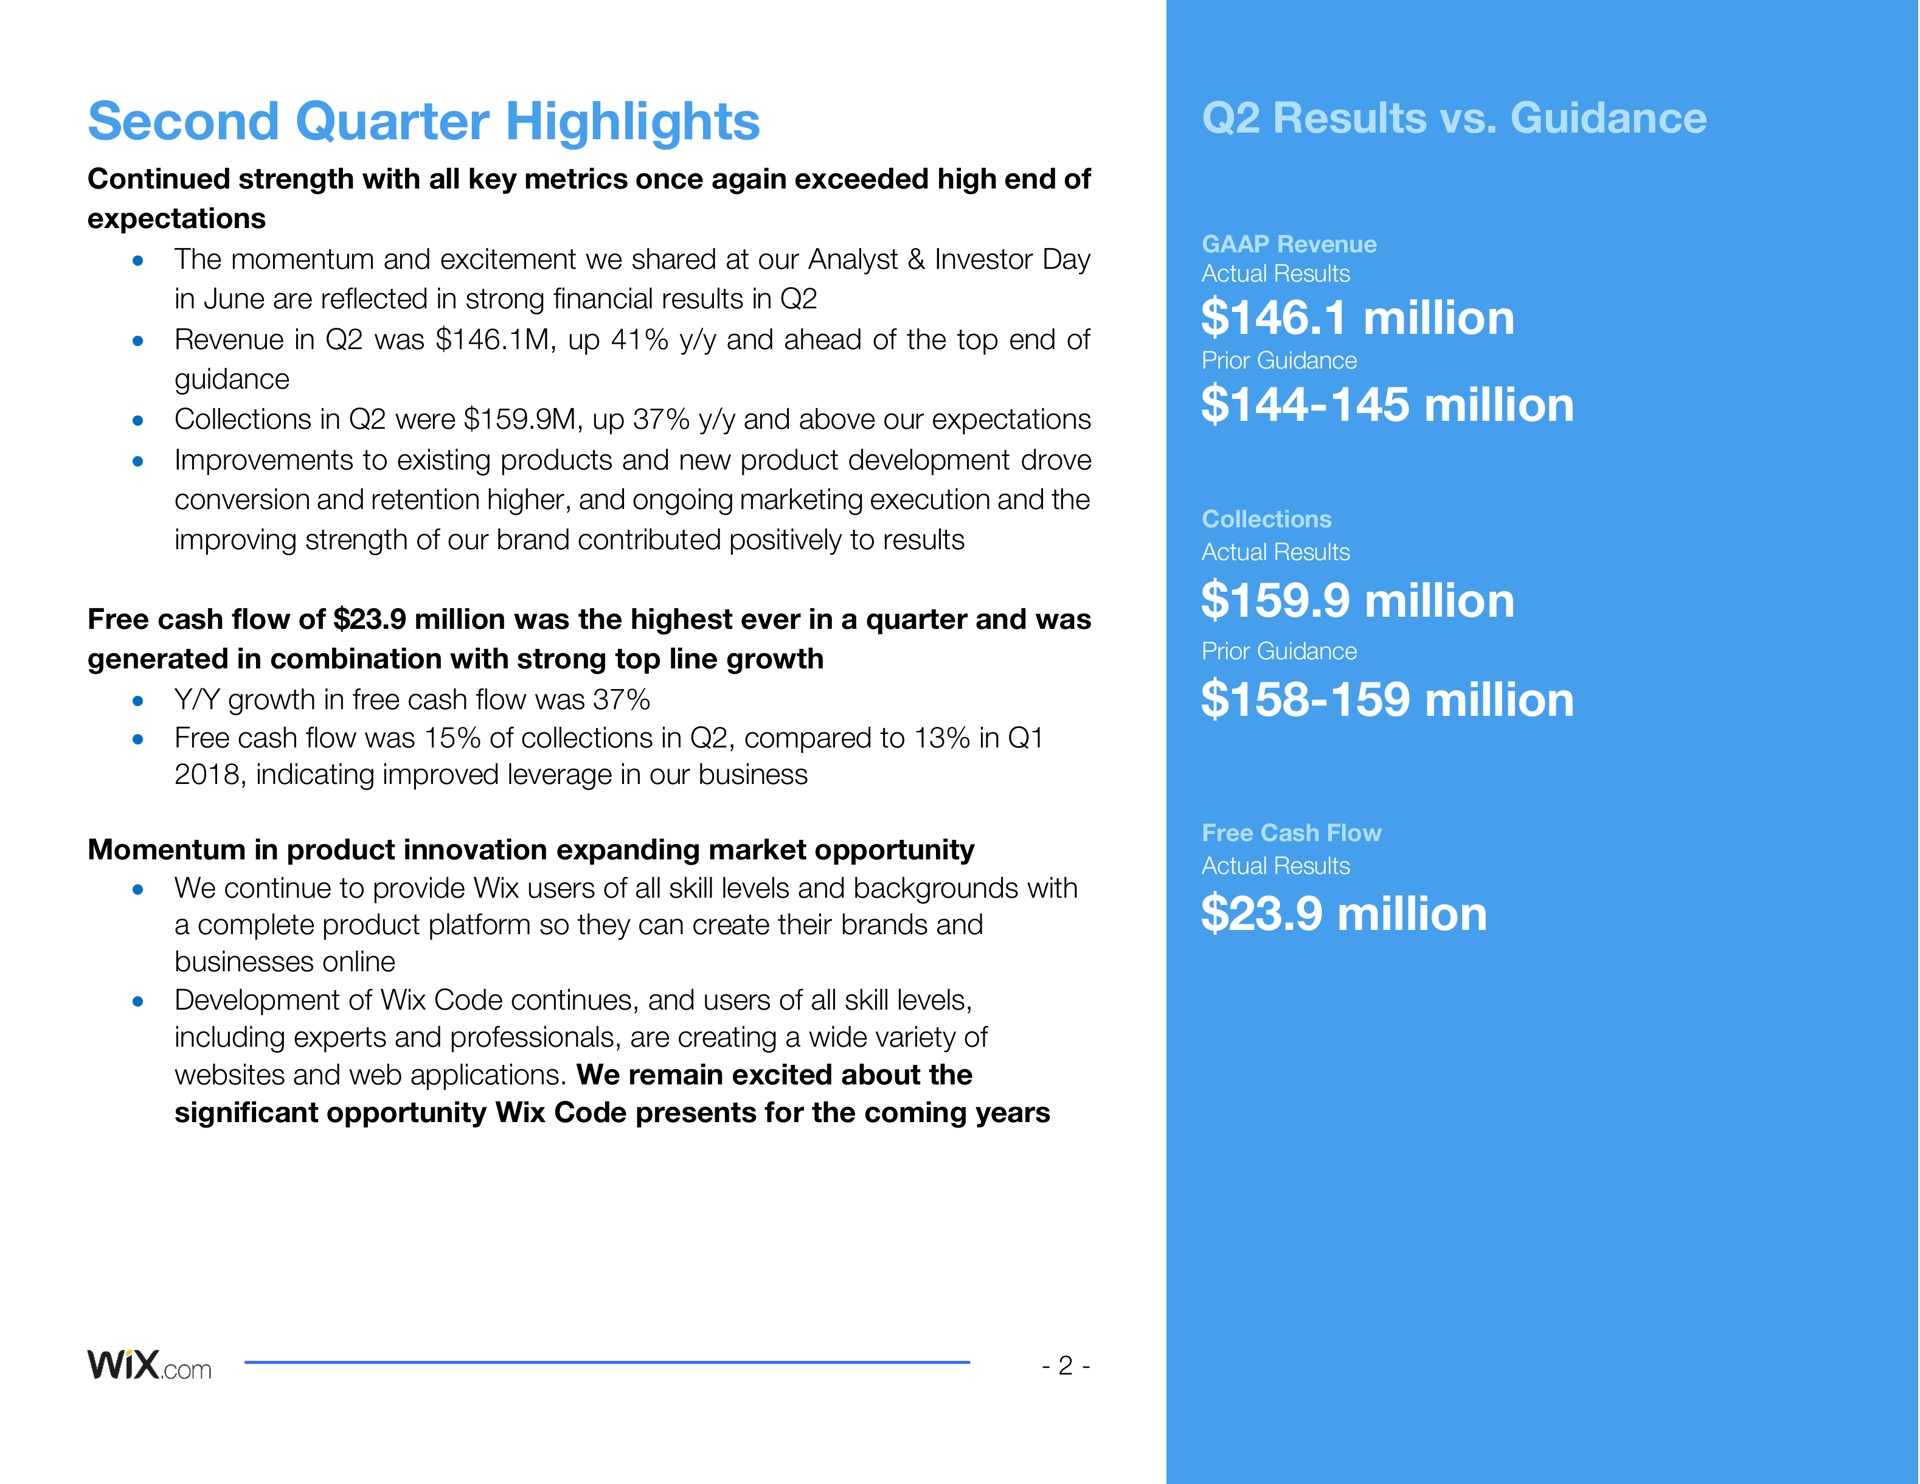 second quarter highlights continued strength with all key metrics once again exceeded high end of expectations the momentum and excitement we shared at our analyst investor day in june are reflected in strong financial results in revenue in was up and ahead of the top end of guidance collections in were up and above our expectations improvements to existing products and new product development drove conversion and retention higher and ongoing marketing execution and the improving strength of our brand contributed positively to results free cash flow of million was the highest ever in a quarter and was generated in combination with strong top line growth growth in free cash flow was free cash flow was of collections in compared to in indicating improved leverage in our business momentum in product innovation expanding market opportunity we continue to provide users of all skill levels and backgrounds with a complete product platform so they can create their brands and businesses development of code continues and users of all skill levels including experts and professionals are creating a wide variety of and web applications we remain excited about the significant opportunity code presents for the coming years results guidance million million million million million | Wix